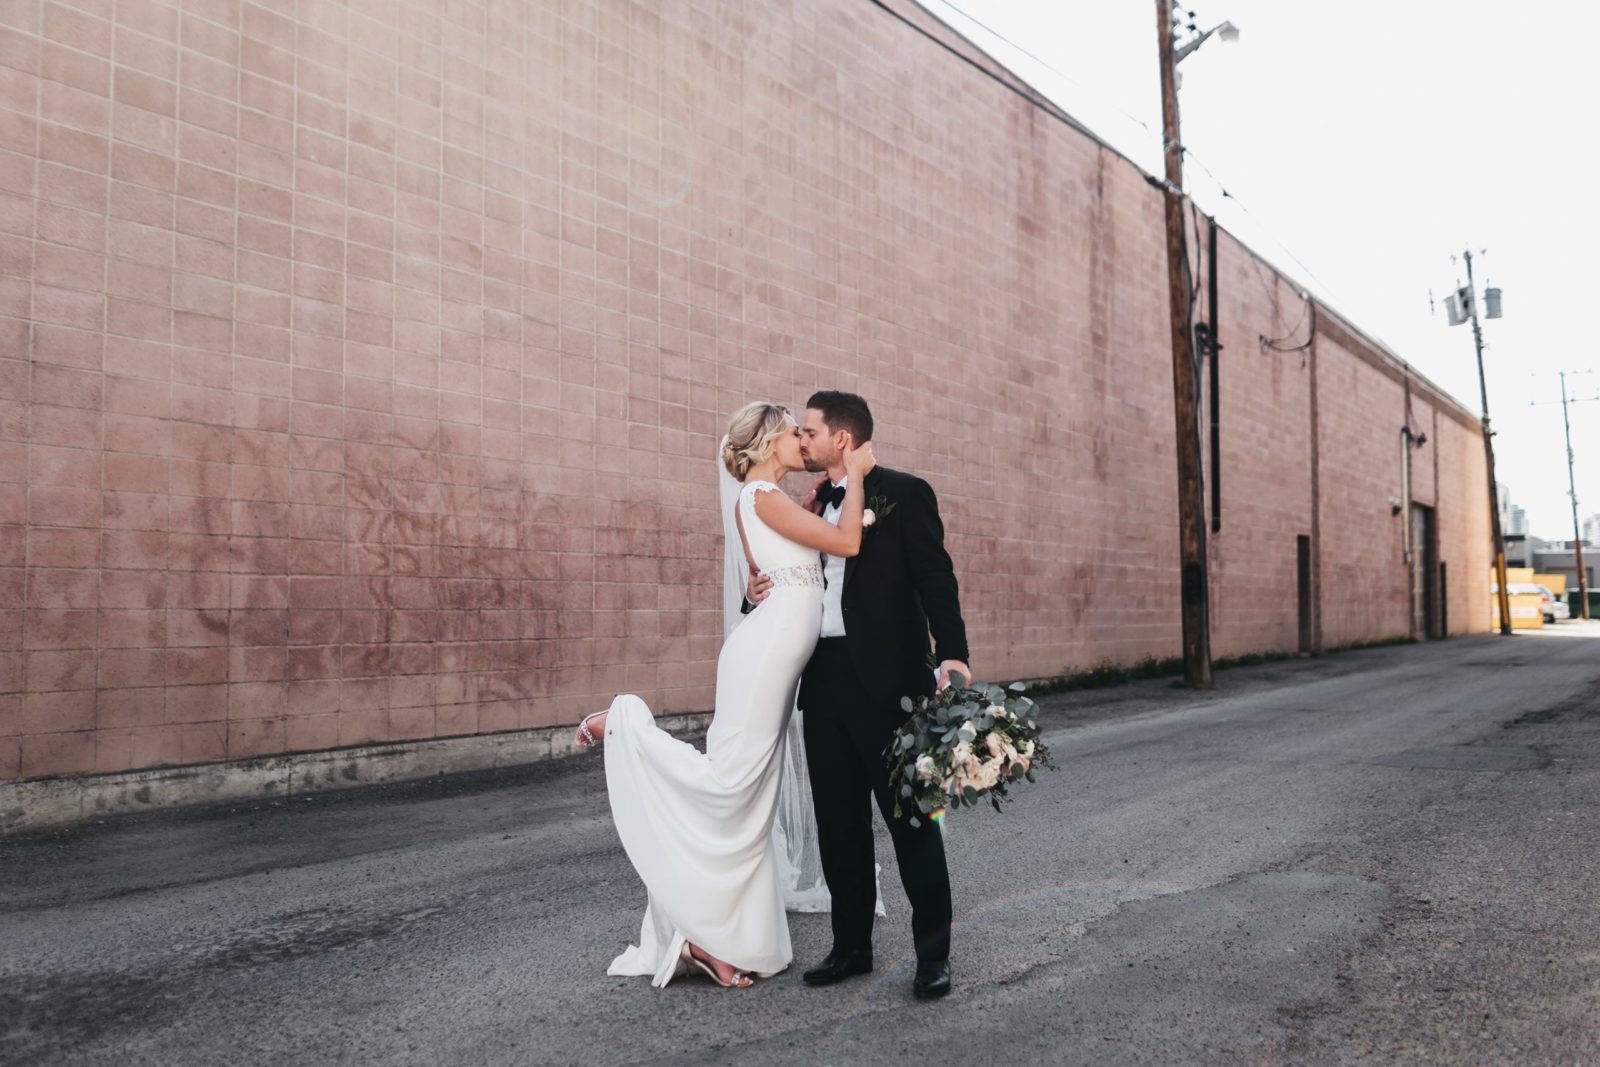 Covid-19 and Your Wedding // Part Two: 6 Tips For A Smoother Postponement Process - on the Bronte Bride Blog - Wedding postponement tips, advice from local Calgary wedding planners, florals, bouquets